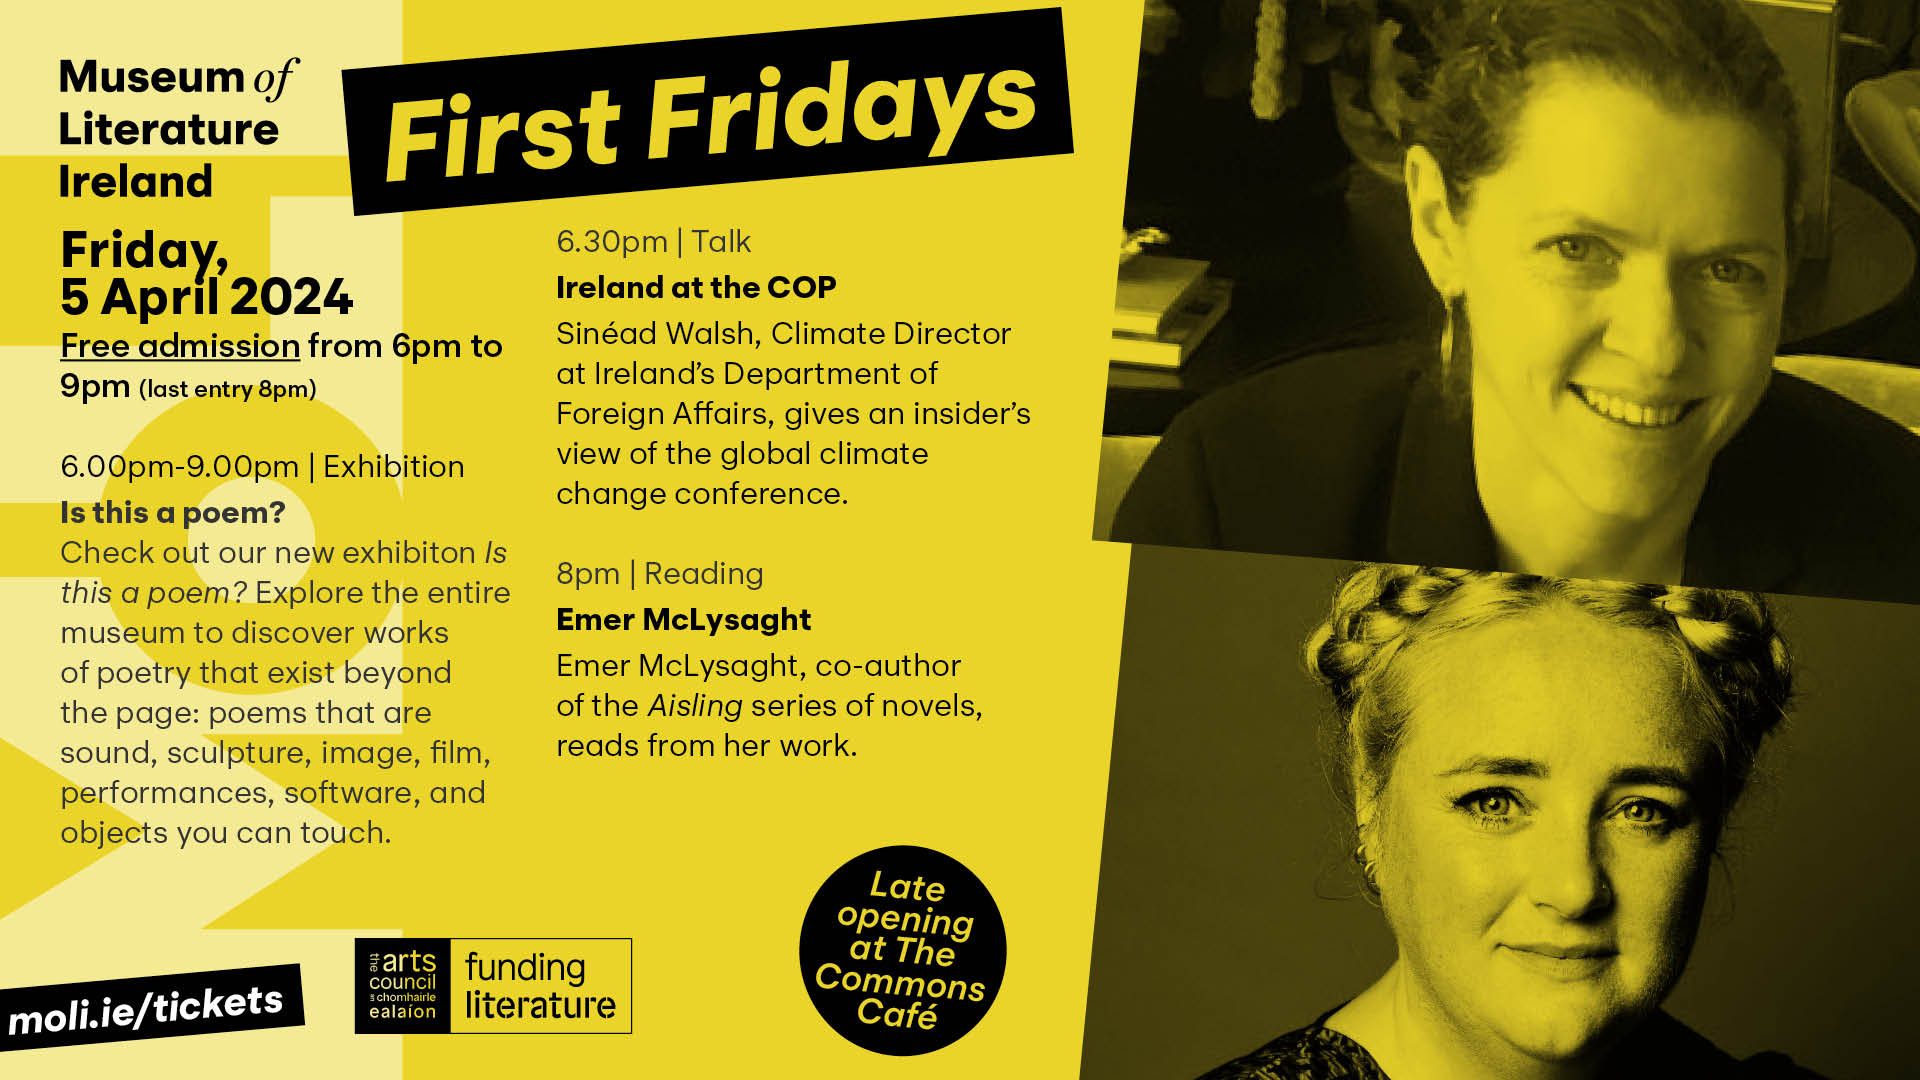 Join us for First Fridays April at the Museum of Literature Ireland (MoLI)